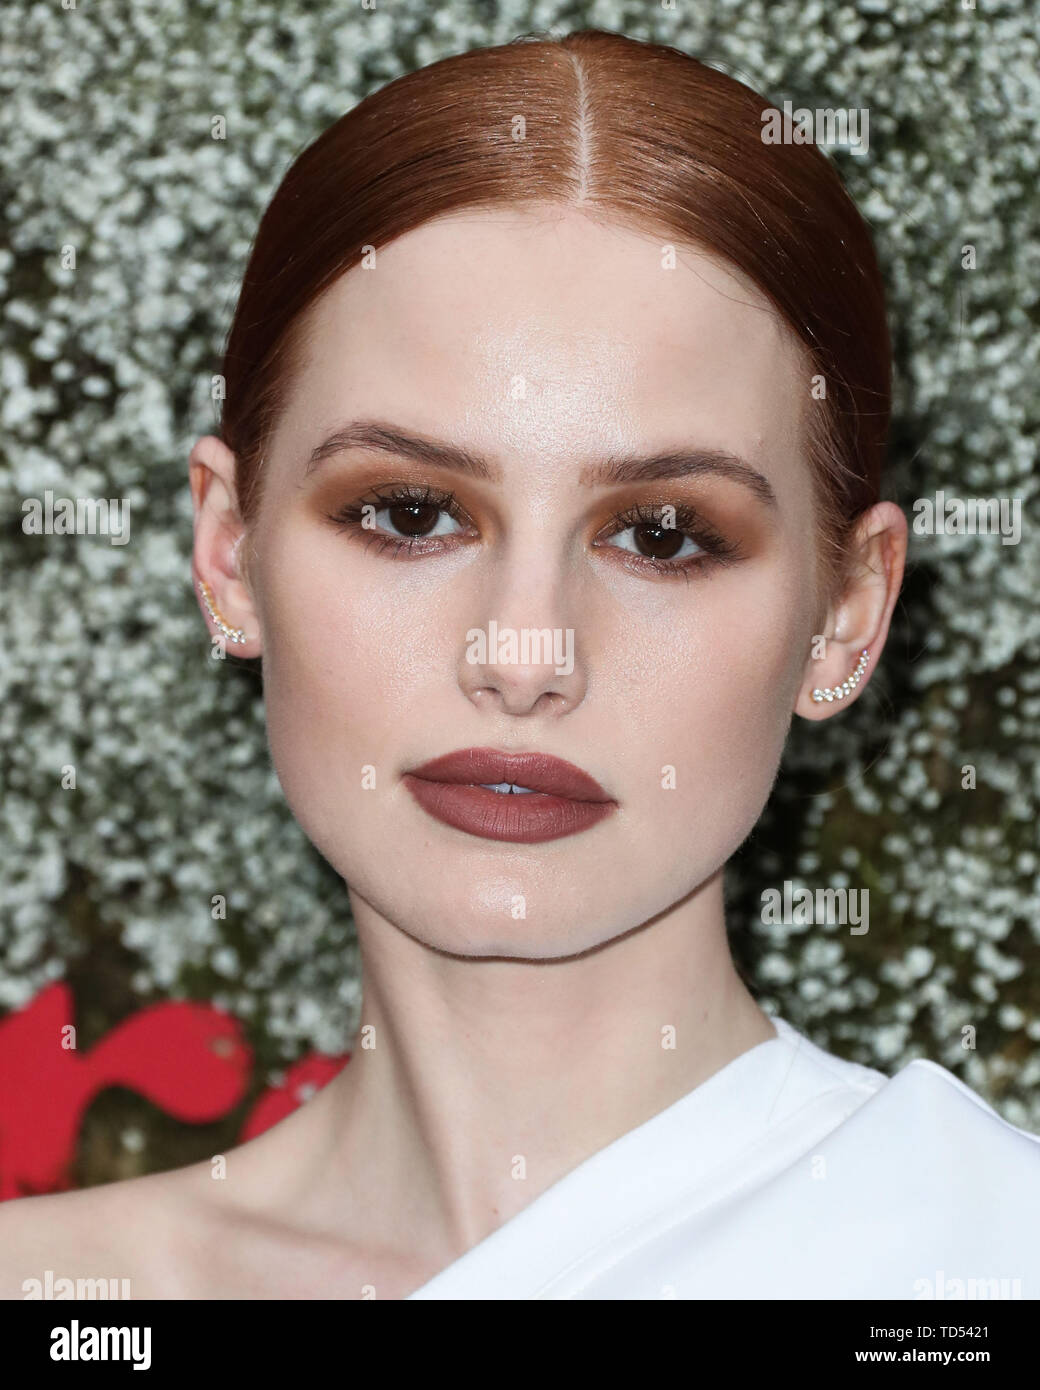 WEST HOLLYWOOD, LOS ANGELES, CALIFORNIA, USA - JUNE 11: Actress Madelaine  Petsch wearing Max Mara arrives at the InStyle Max Mara Women In Film  Celebration held at Chateau Marmont on June 11,